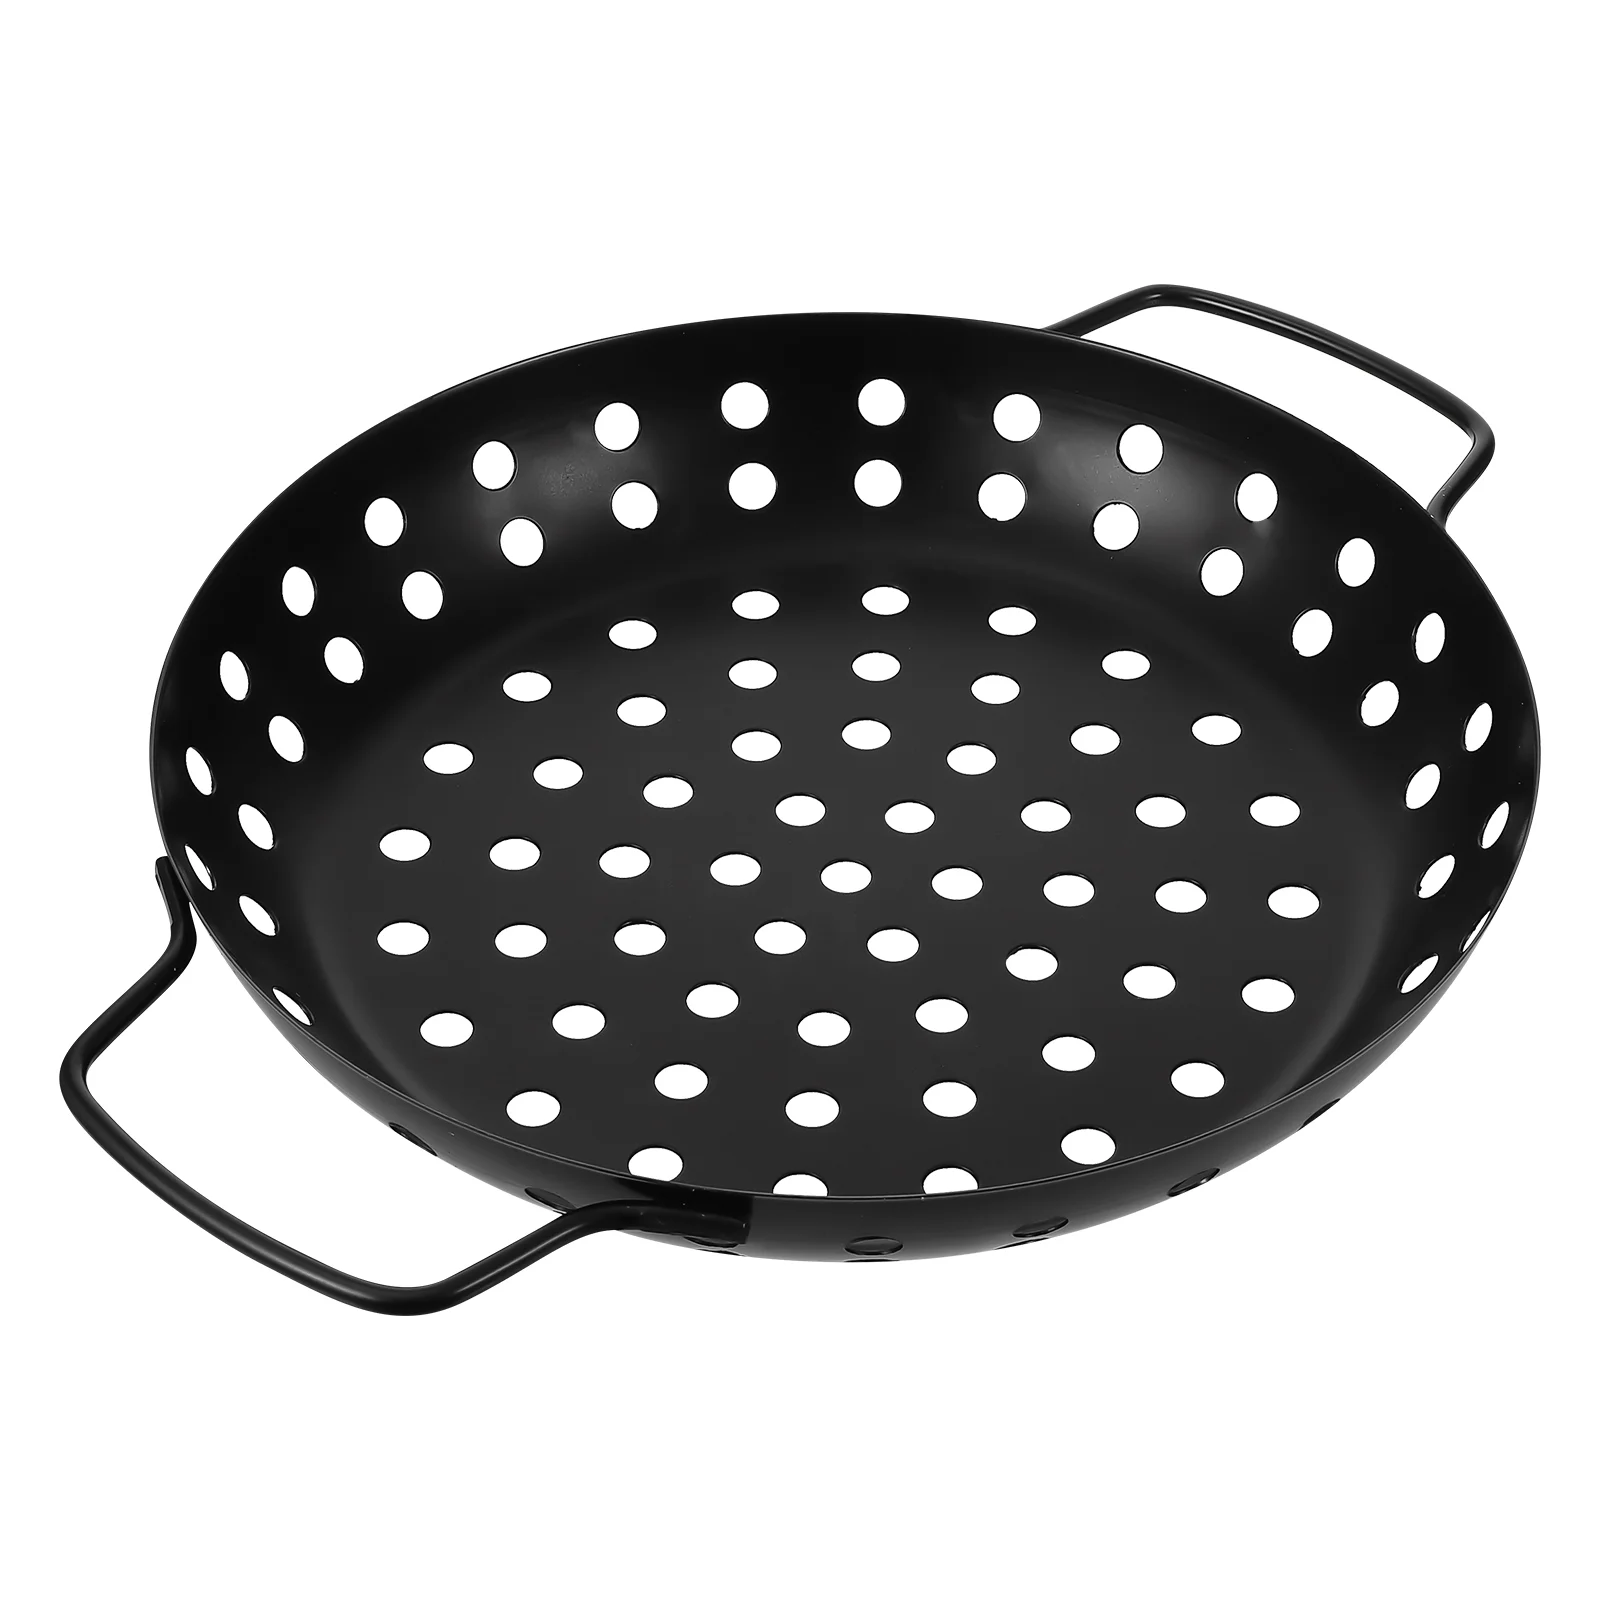 

Grill Grid Pan Bbq Topper Basket Grilling Barbecue Steel Grates Tray Baking Fish Replacement Charcoal Cooking Nonstick Stainless